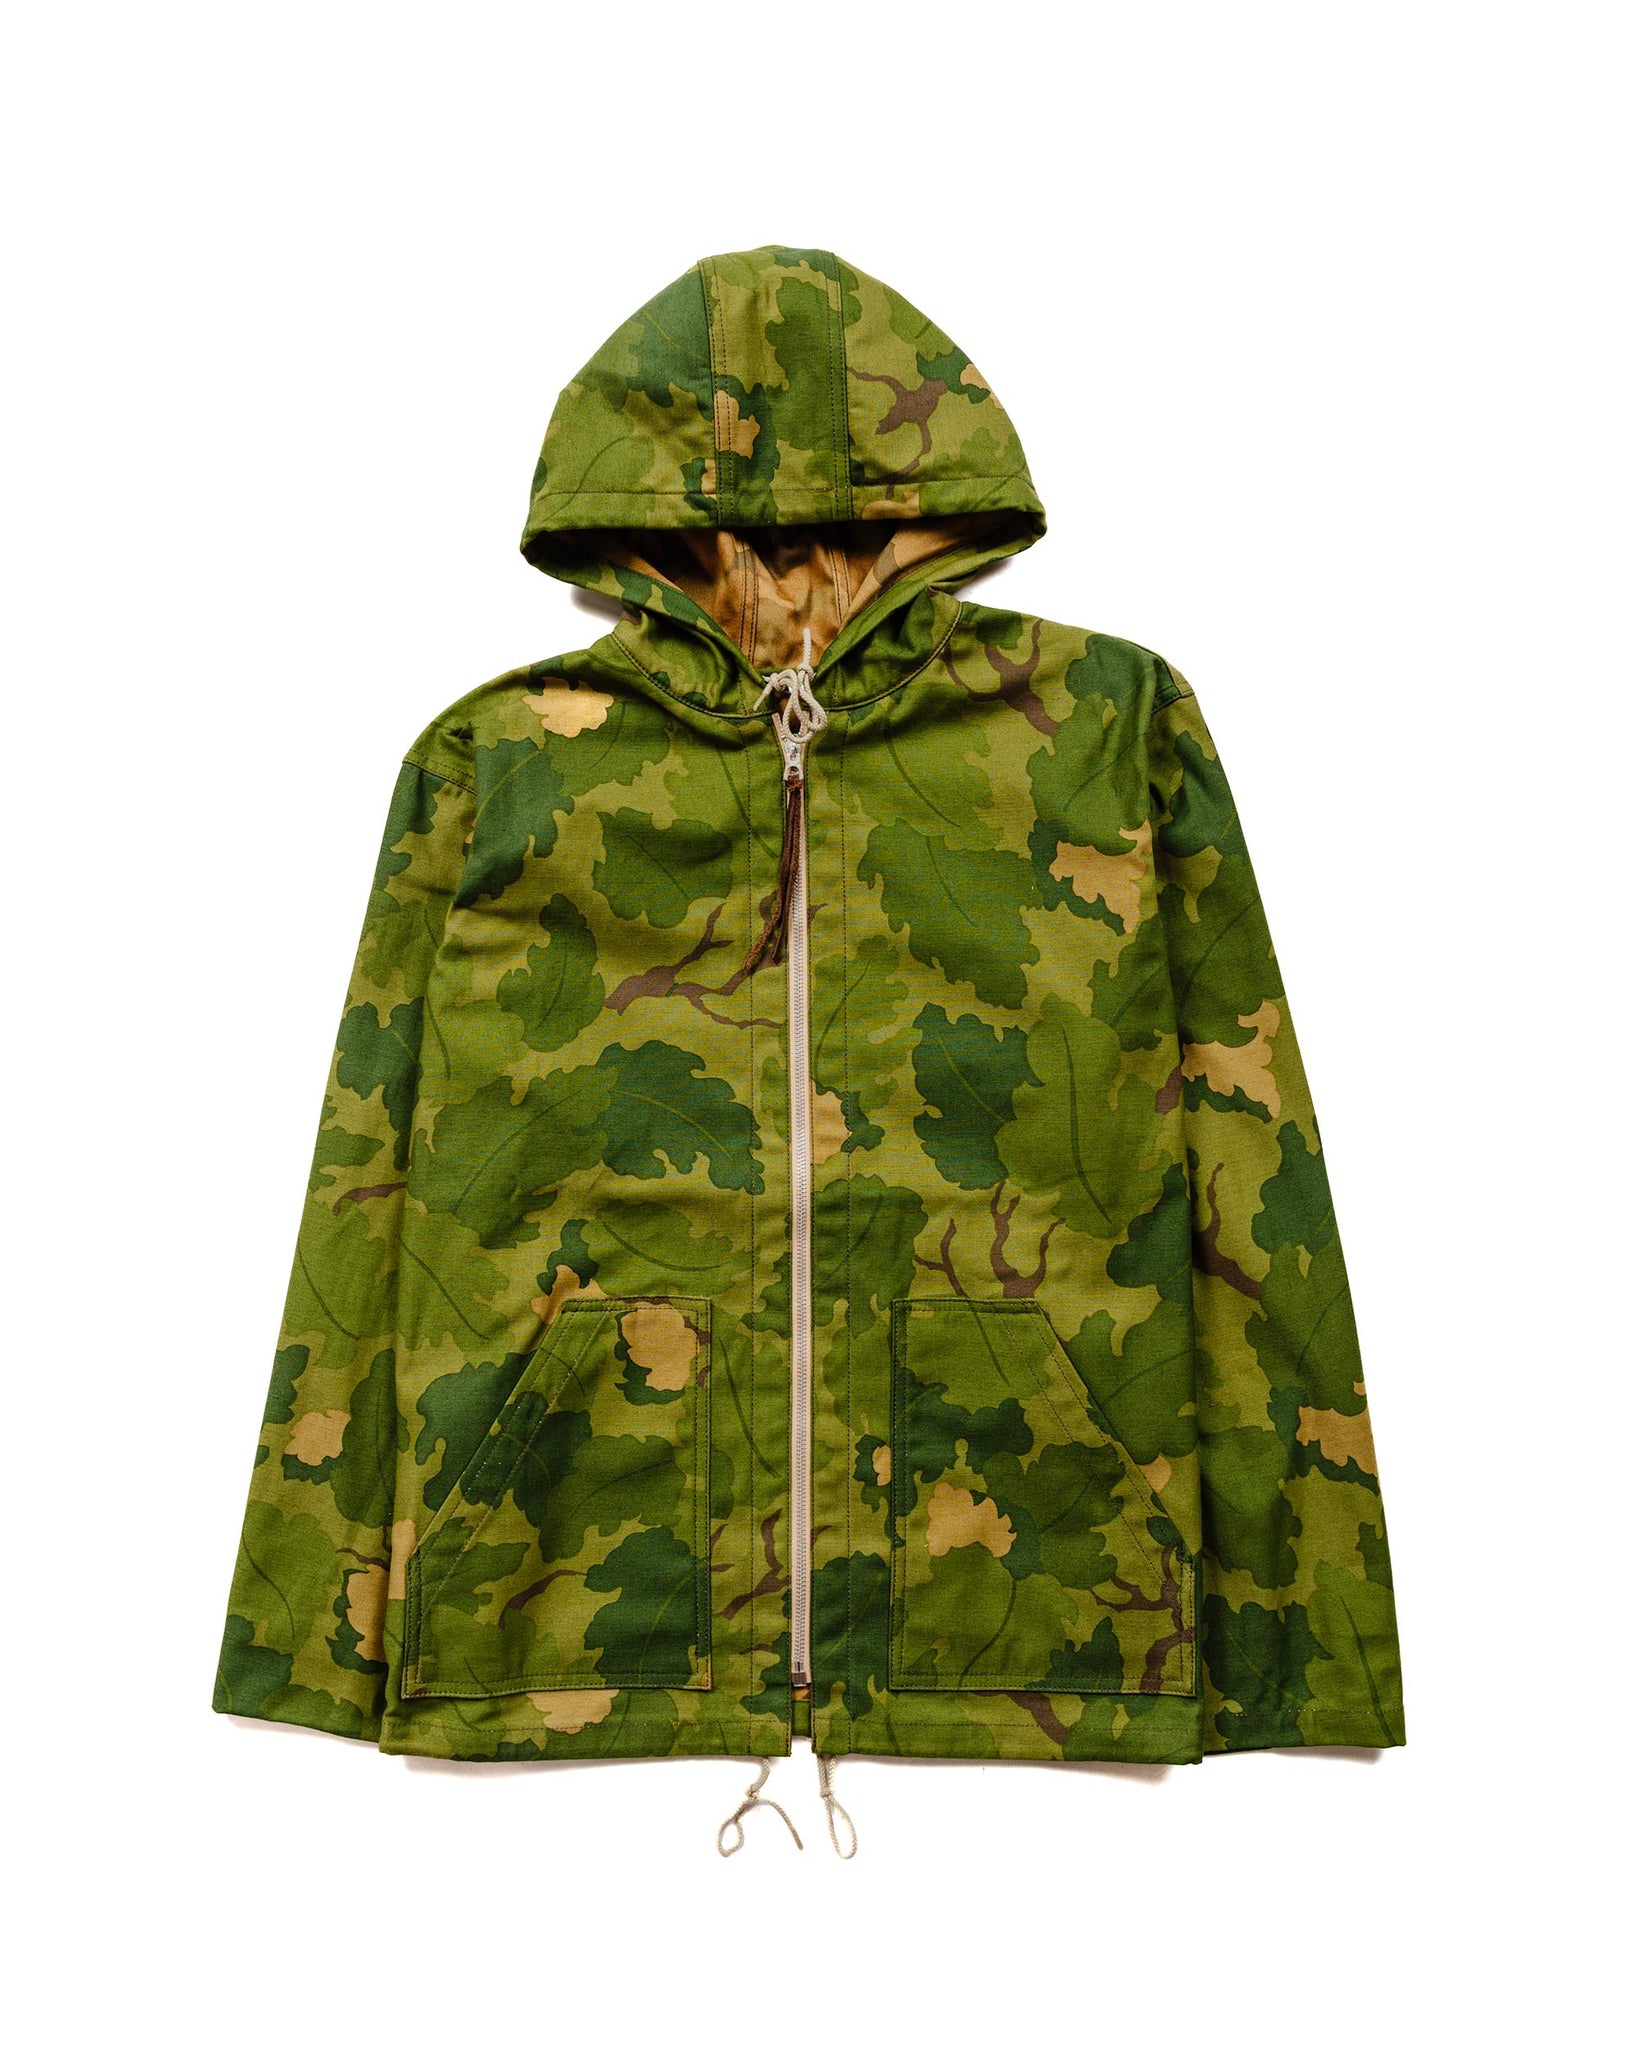 The Real McCoy's MJ23007 Camouflage Parka / Mitchell Pattern Green